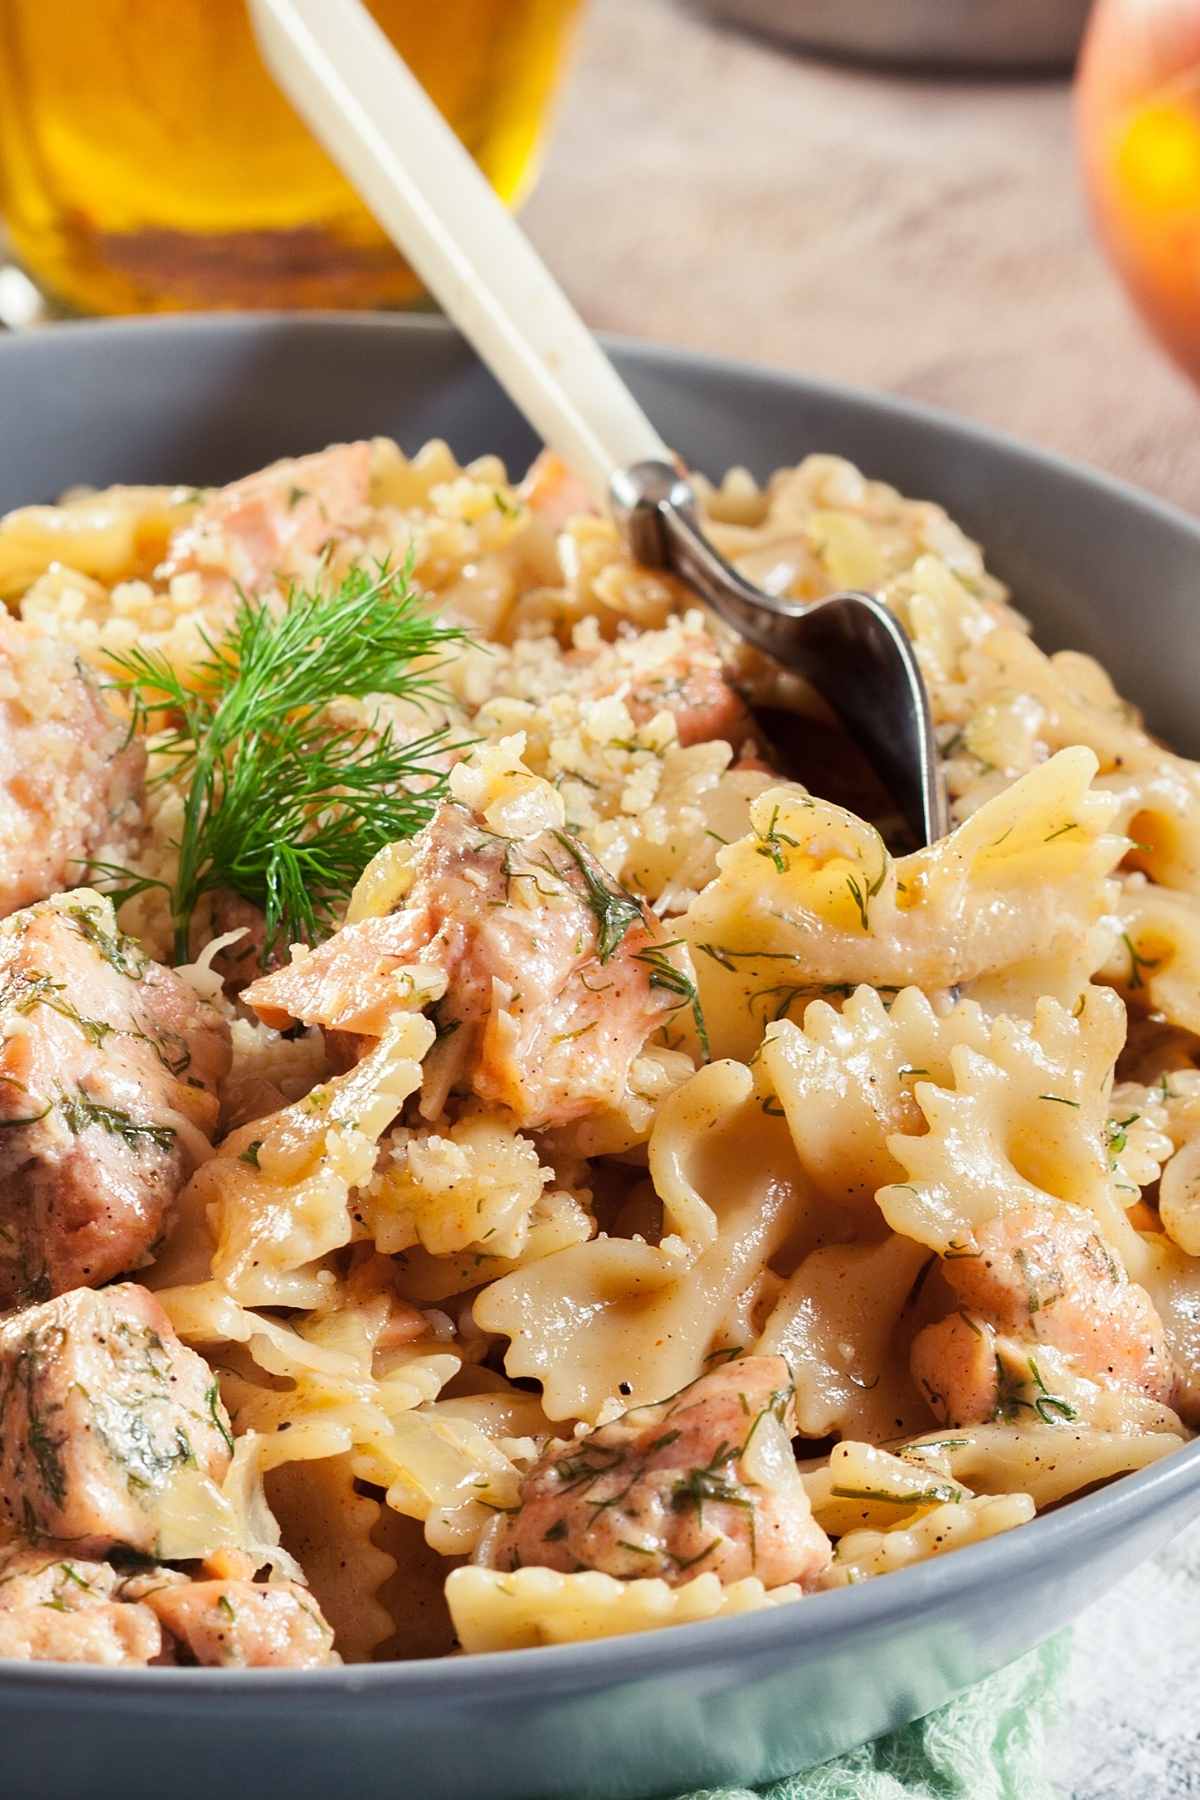 Creamy Farfalle Pasta makes the perfect easy weeknight meal. It’s deliciously creamy and looks so elegant - no one will guess that you pulled it together in less than 30 minutes.